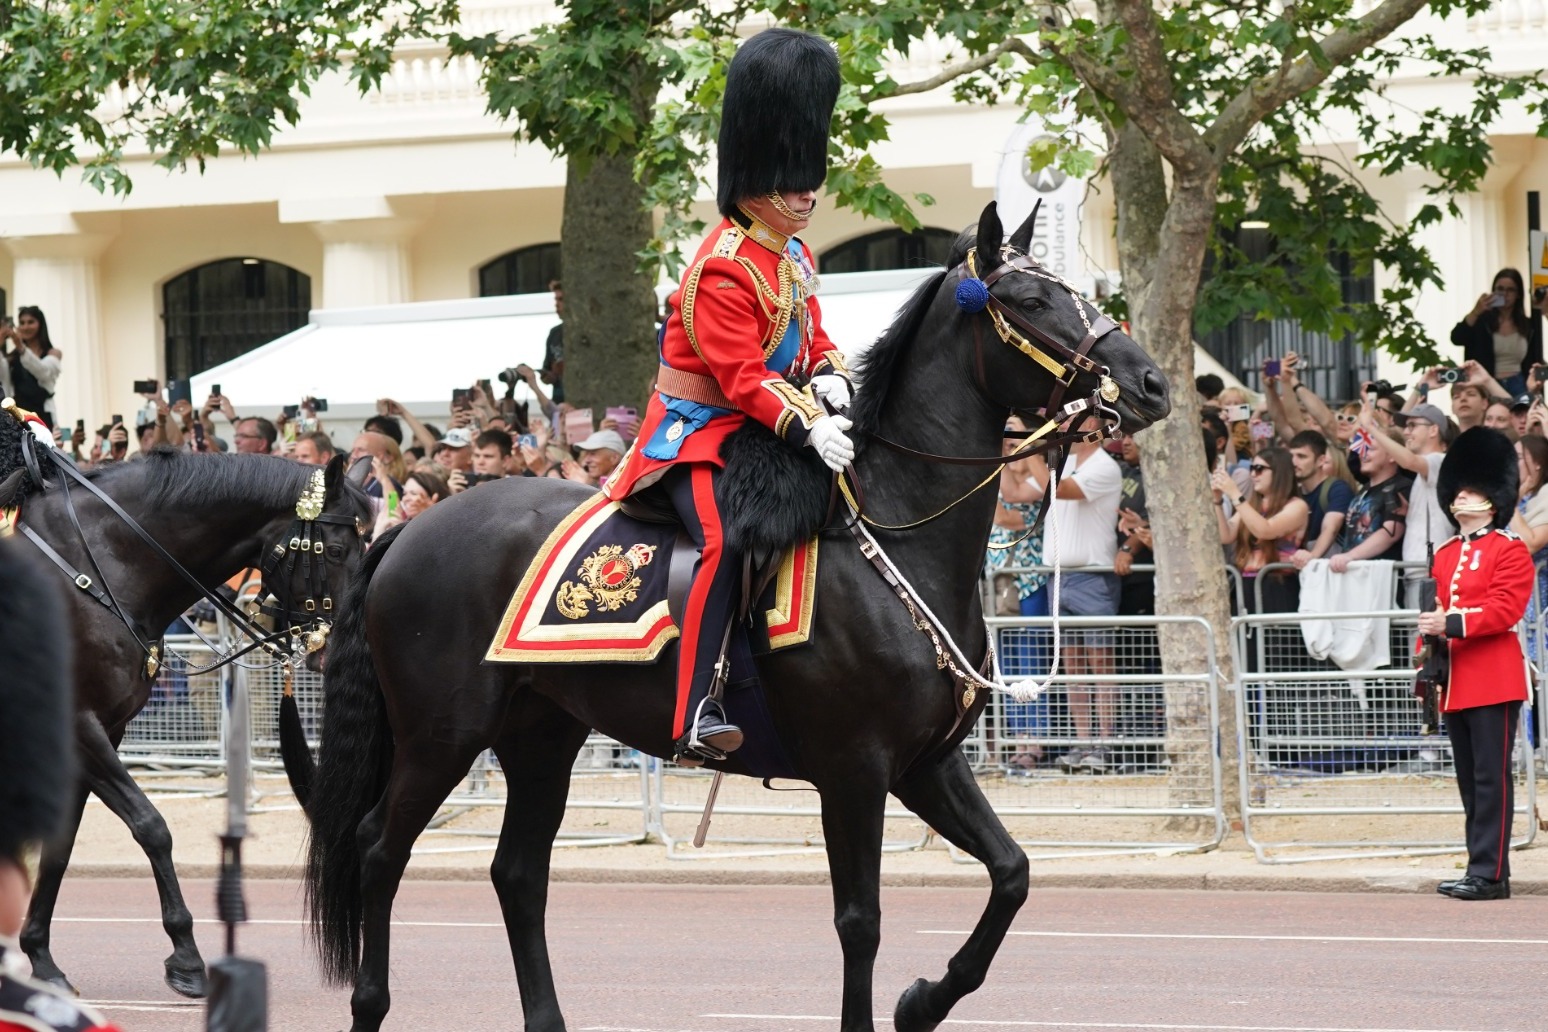 King takes part in first Trooping the Colour ceremony as monarch 